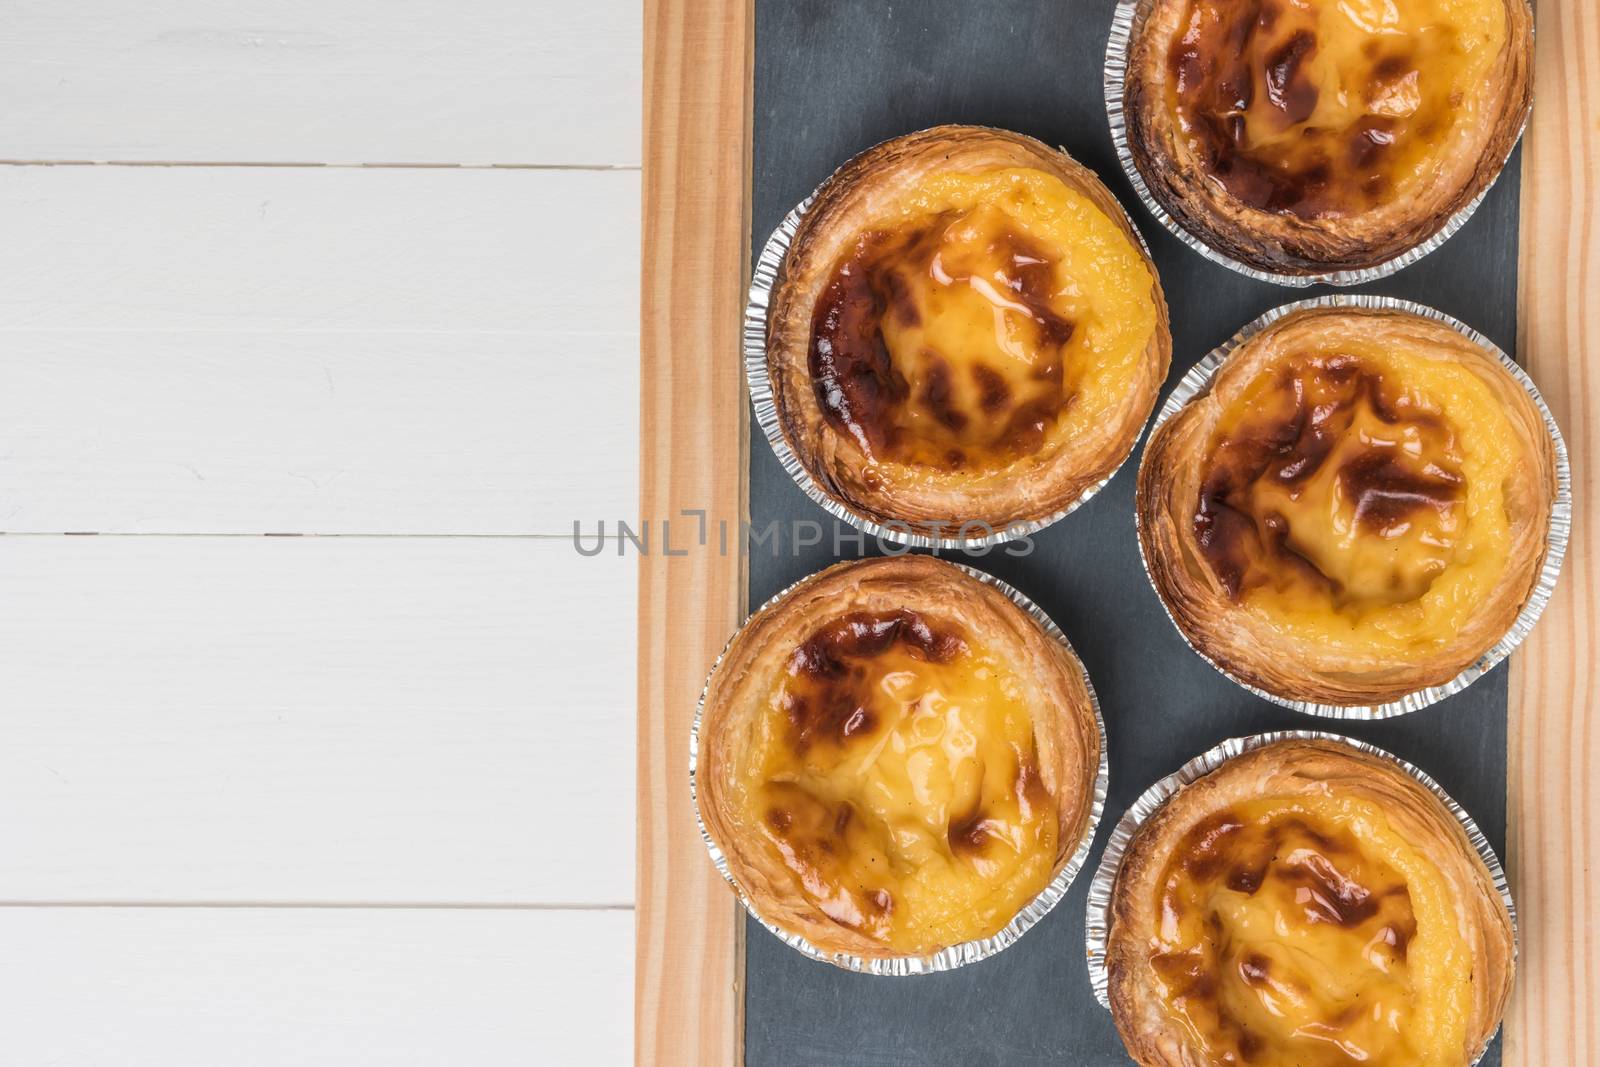 Pasteis de nata, typical Portuguese egg tart pastries on a set table. Top view with copy space